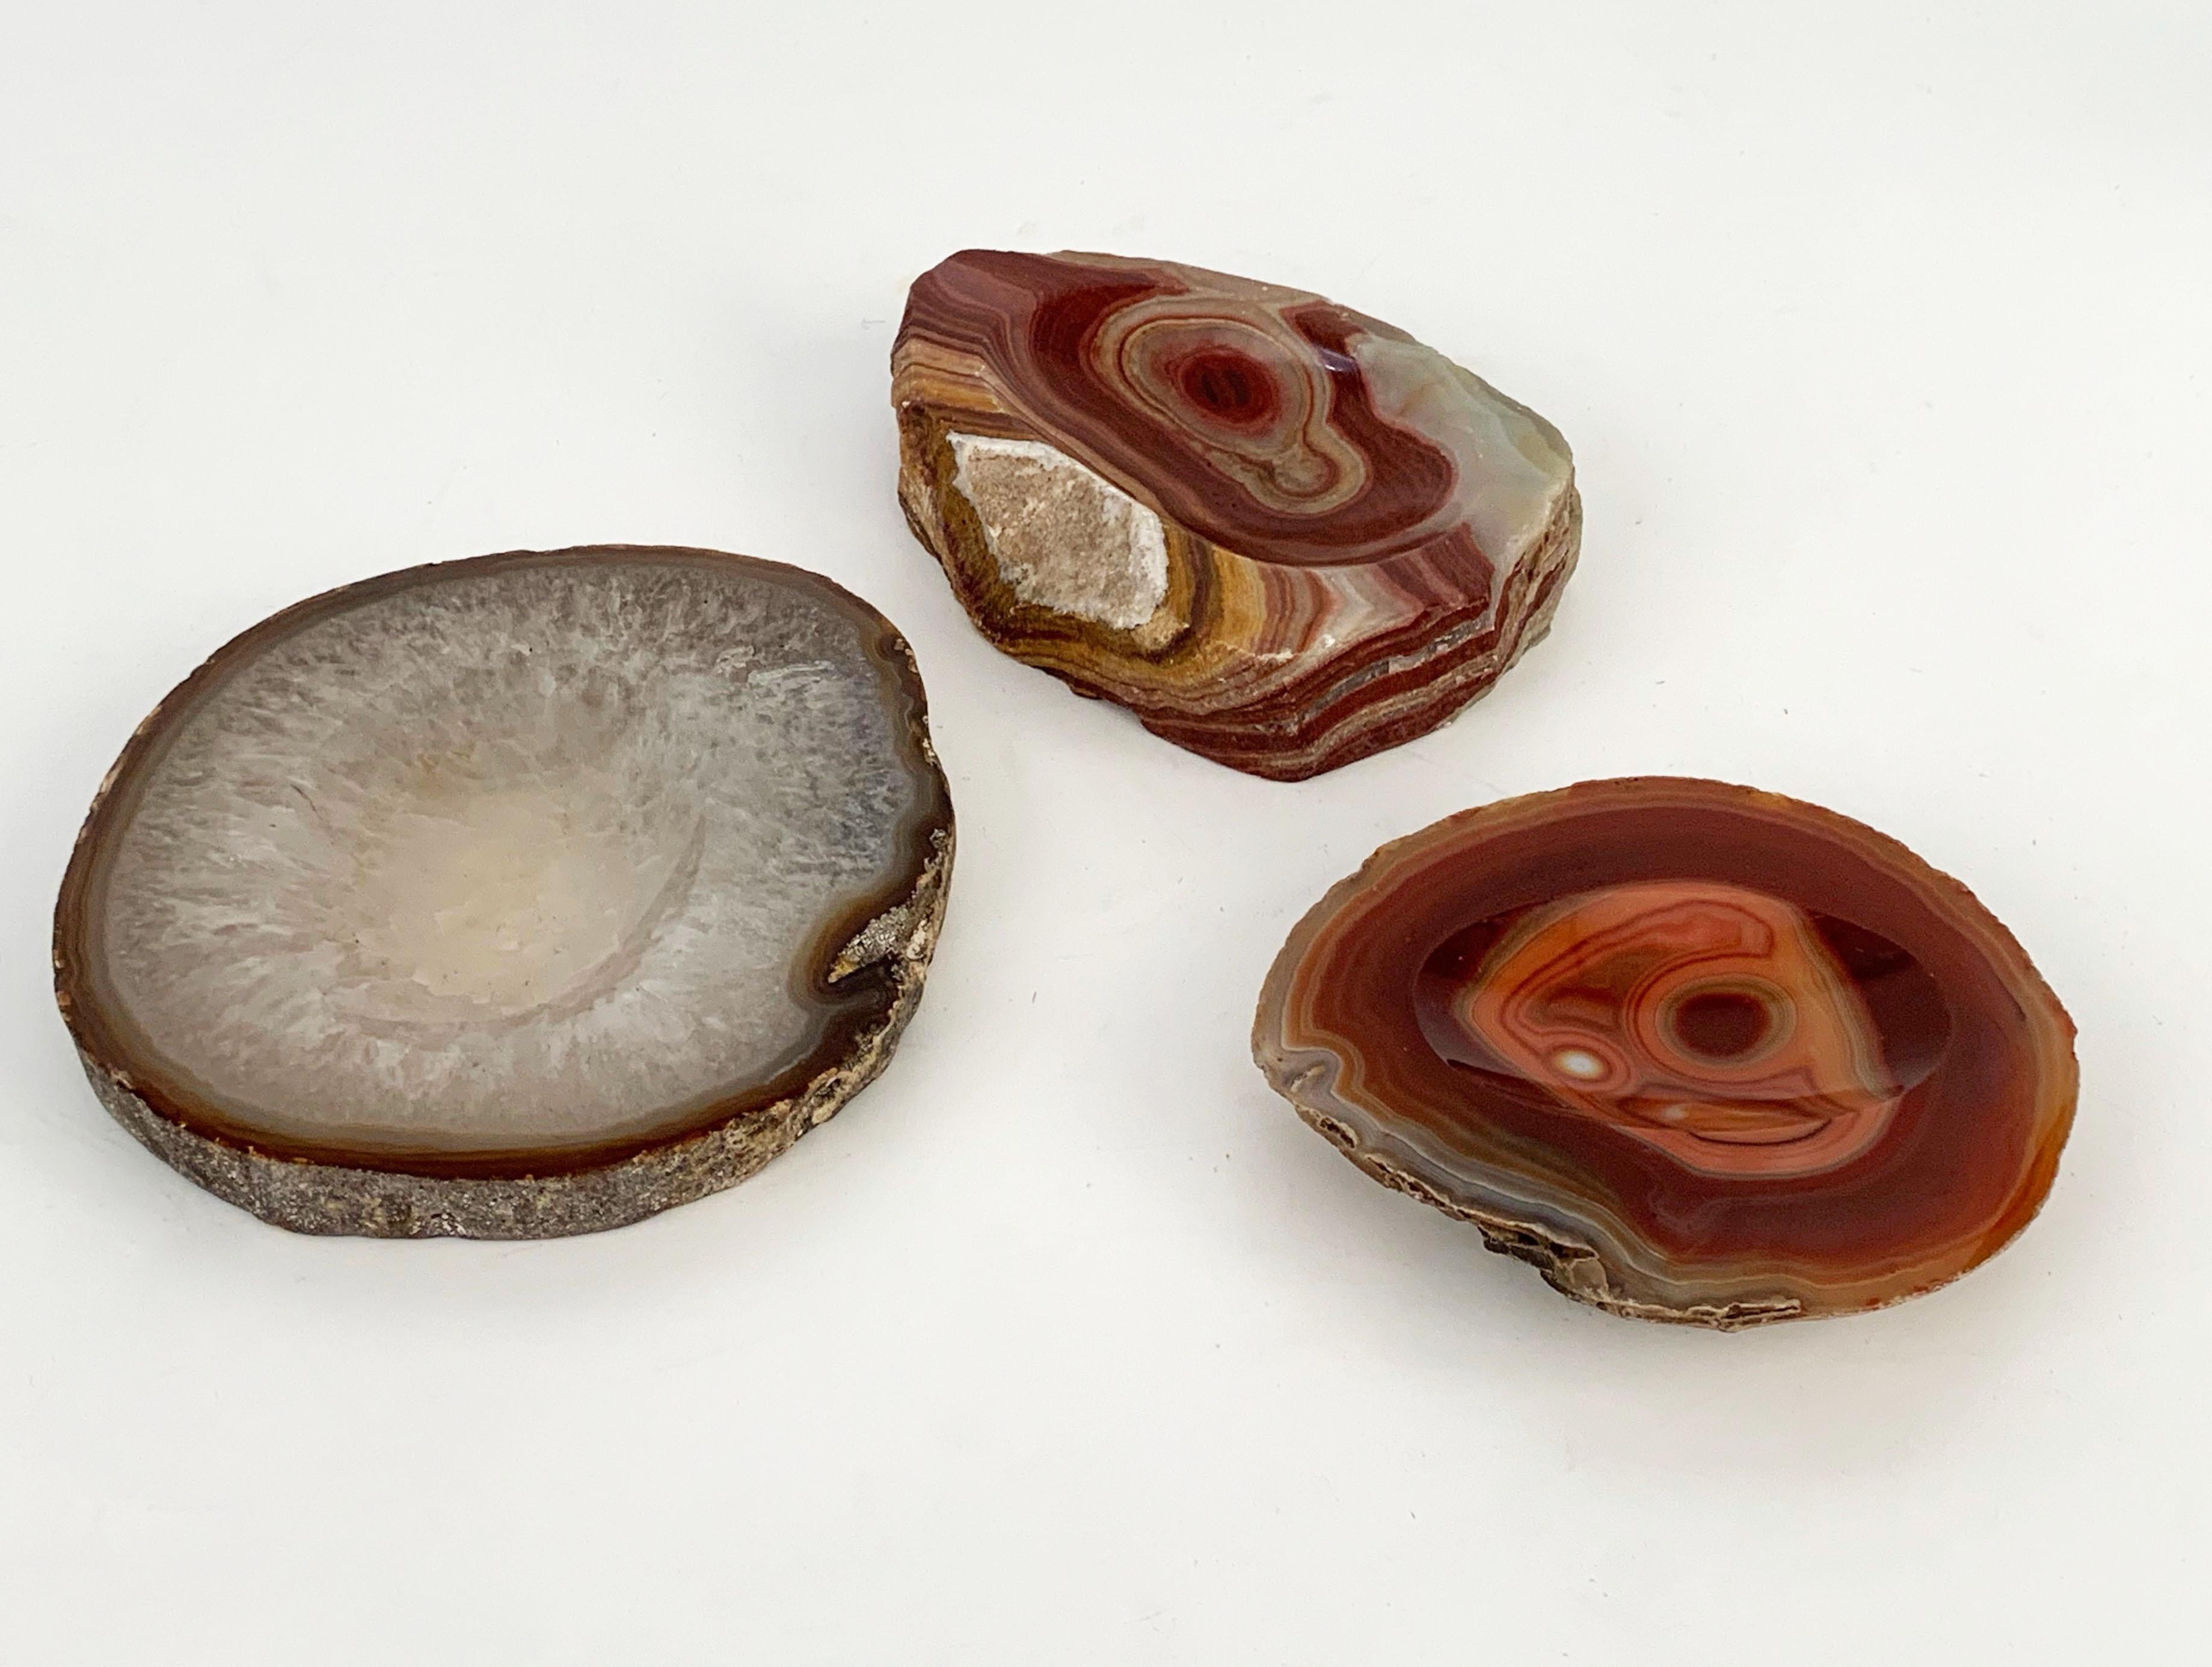 Midcentury White, Organge and Red Onyx, Agate and Quartz Decorative Geode Bowls For Sale 1